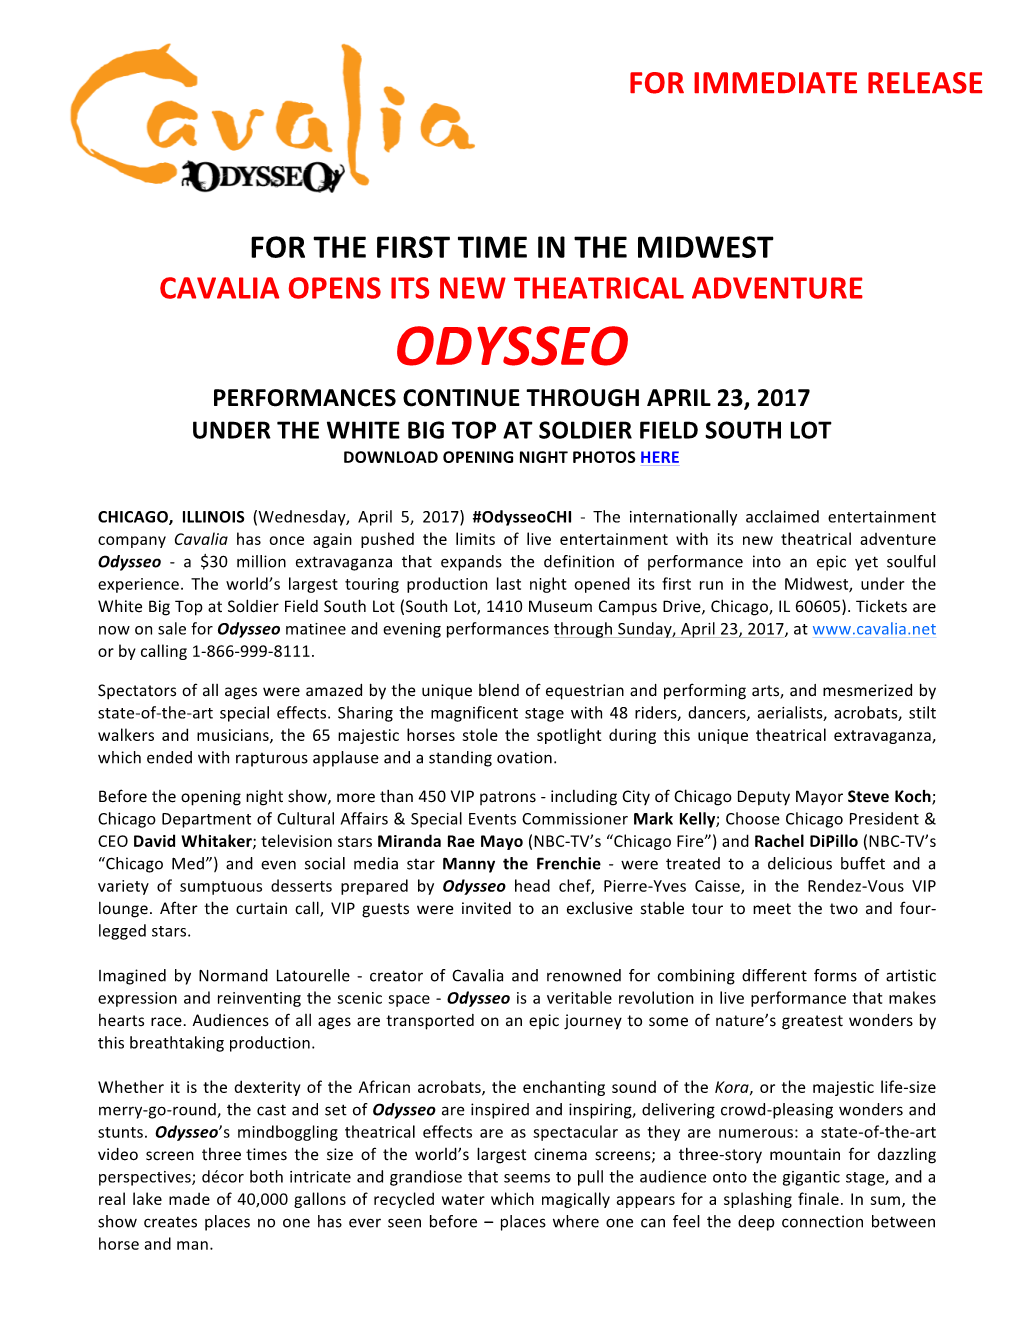 Odysseo Performances Continue Through April 23, 2017 Under the White Big Top at Soldier Field South Lot Download Opening Night Photos Here